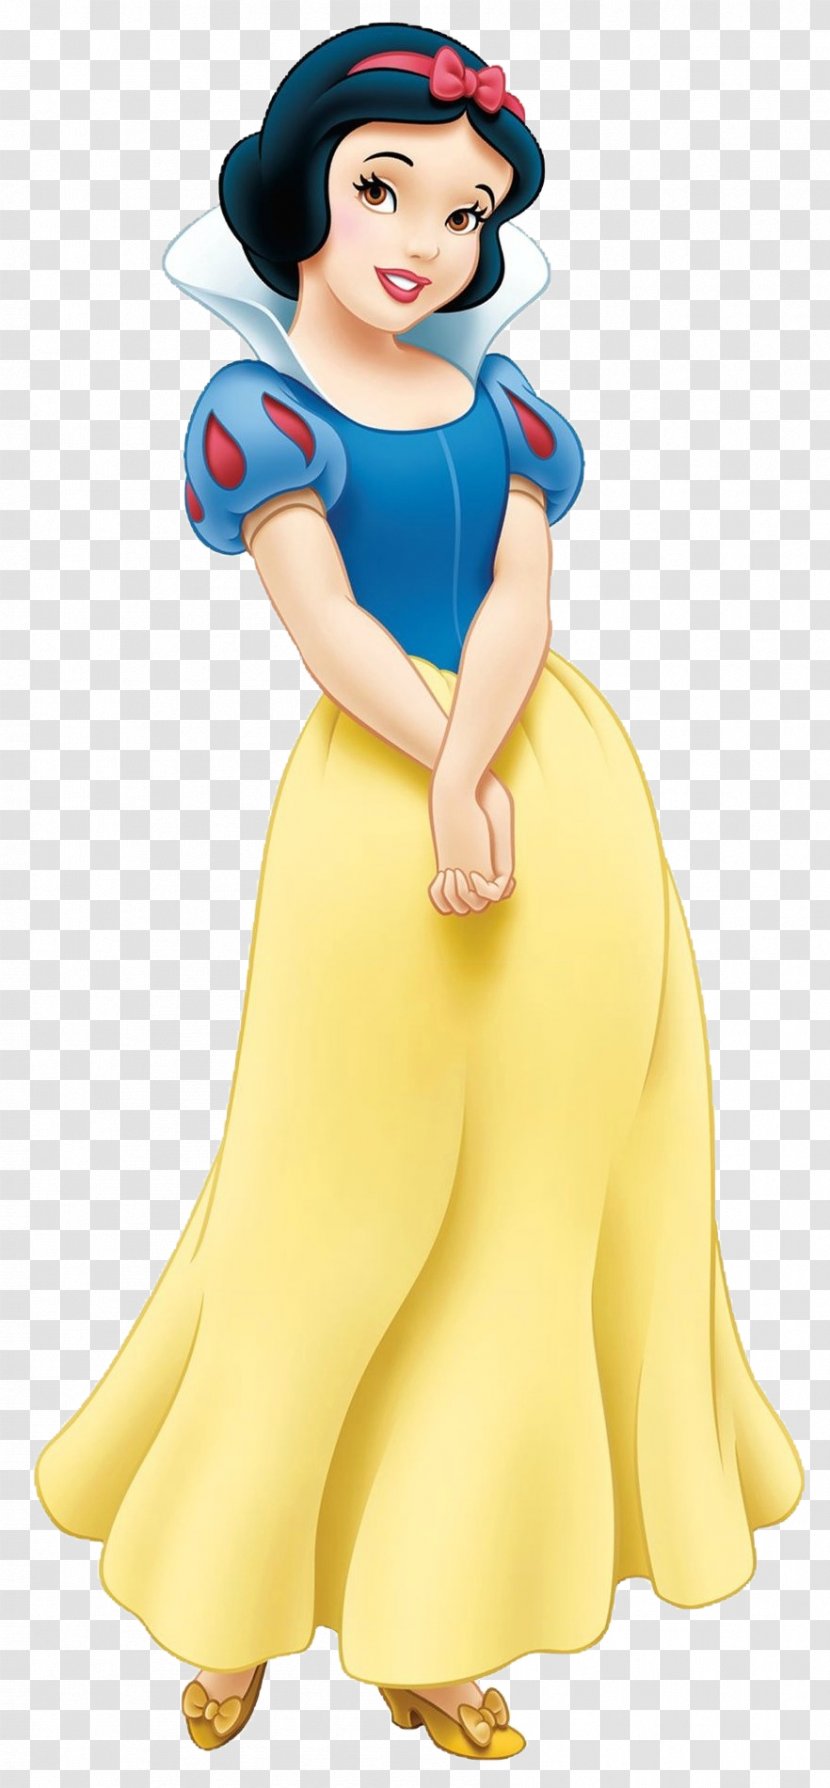 Snow White And The Seven Dwarfs Queen Magic Mirror - Jiminy Cricket Transparent PNG